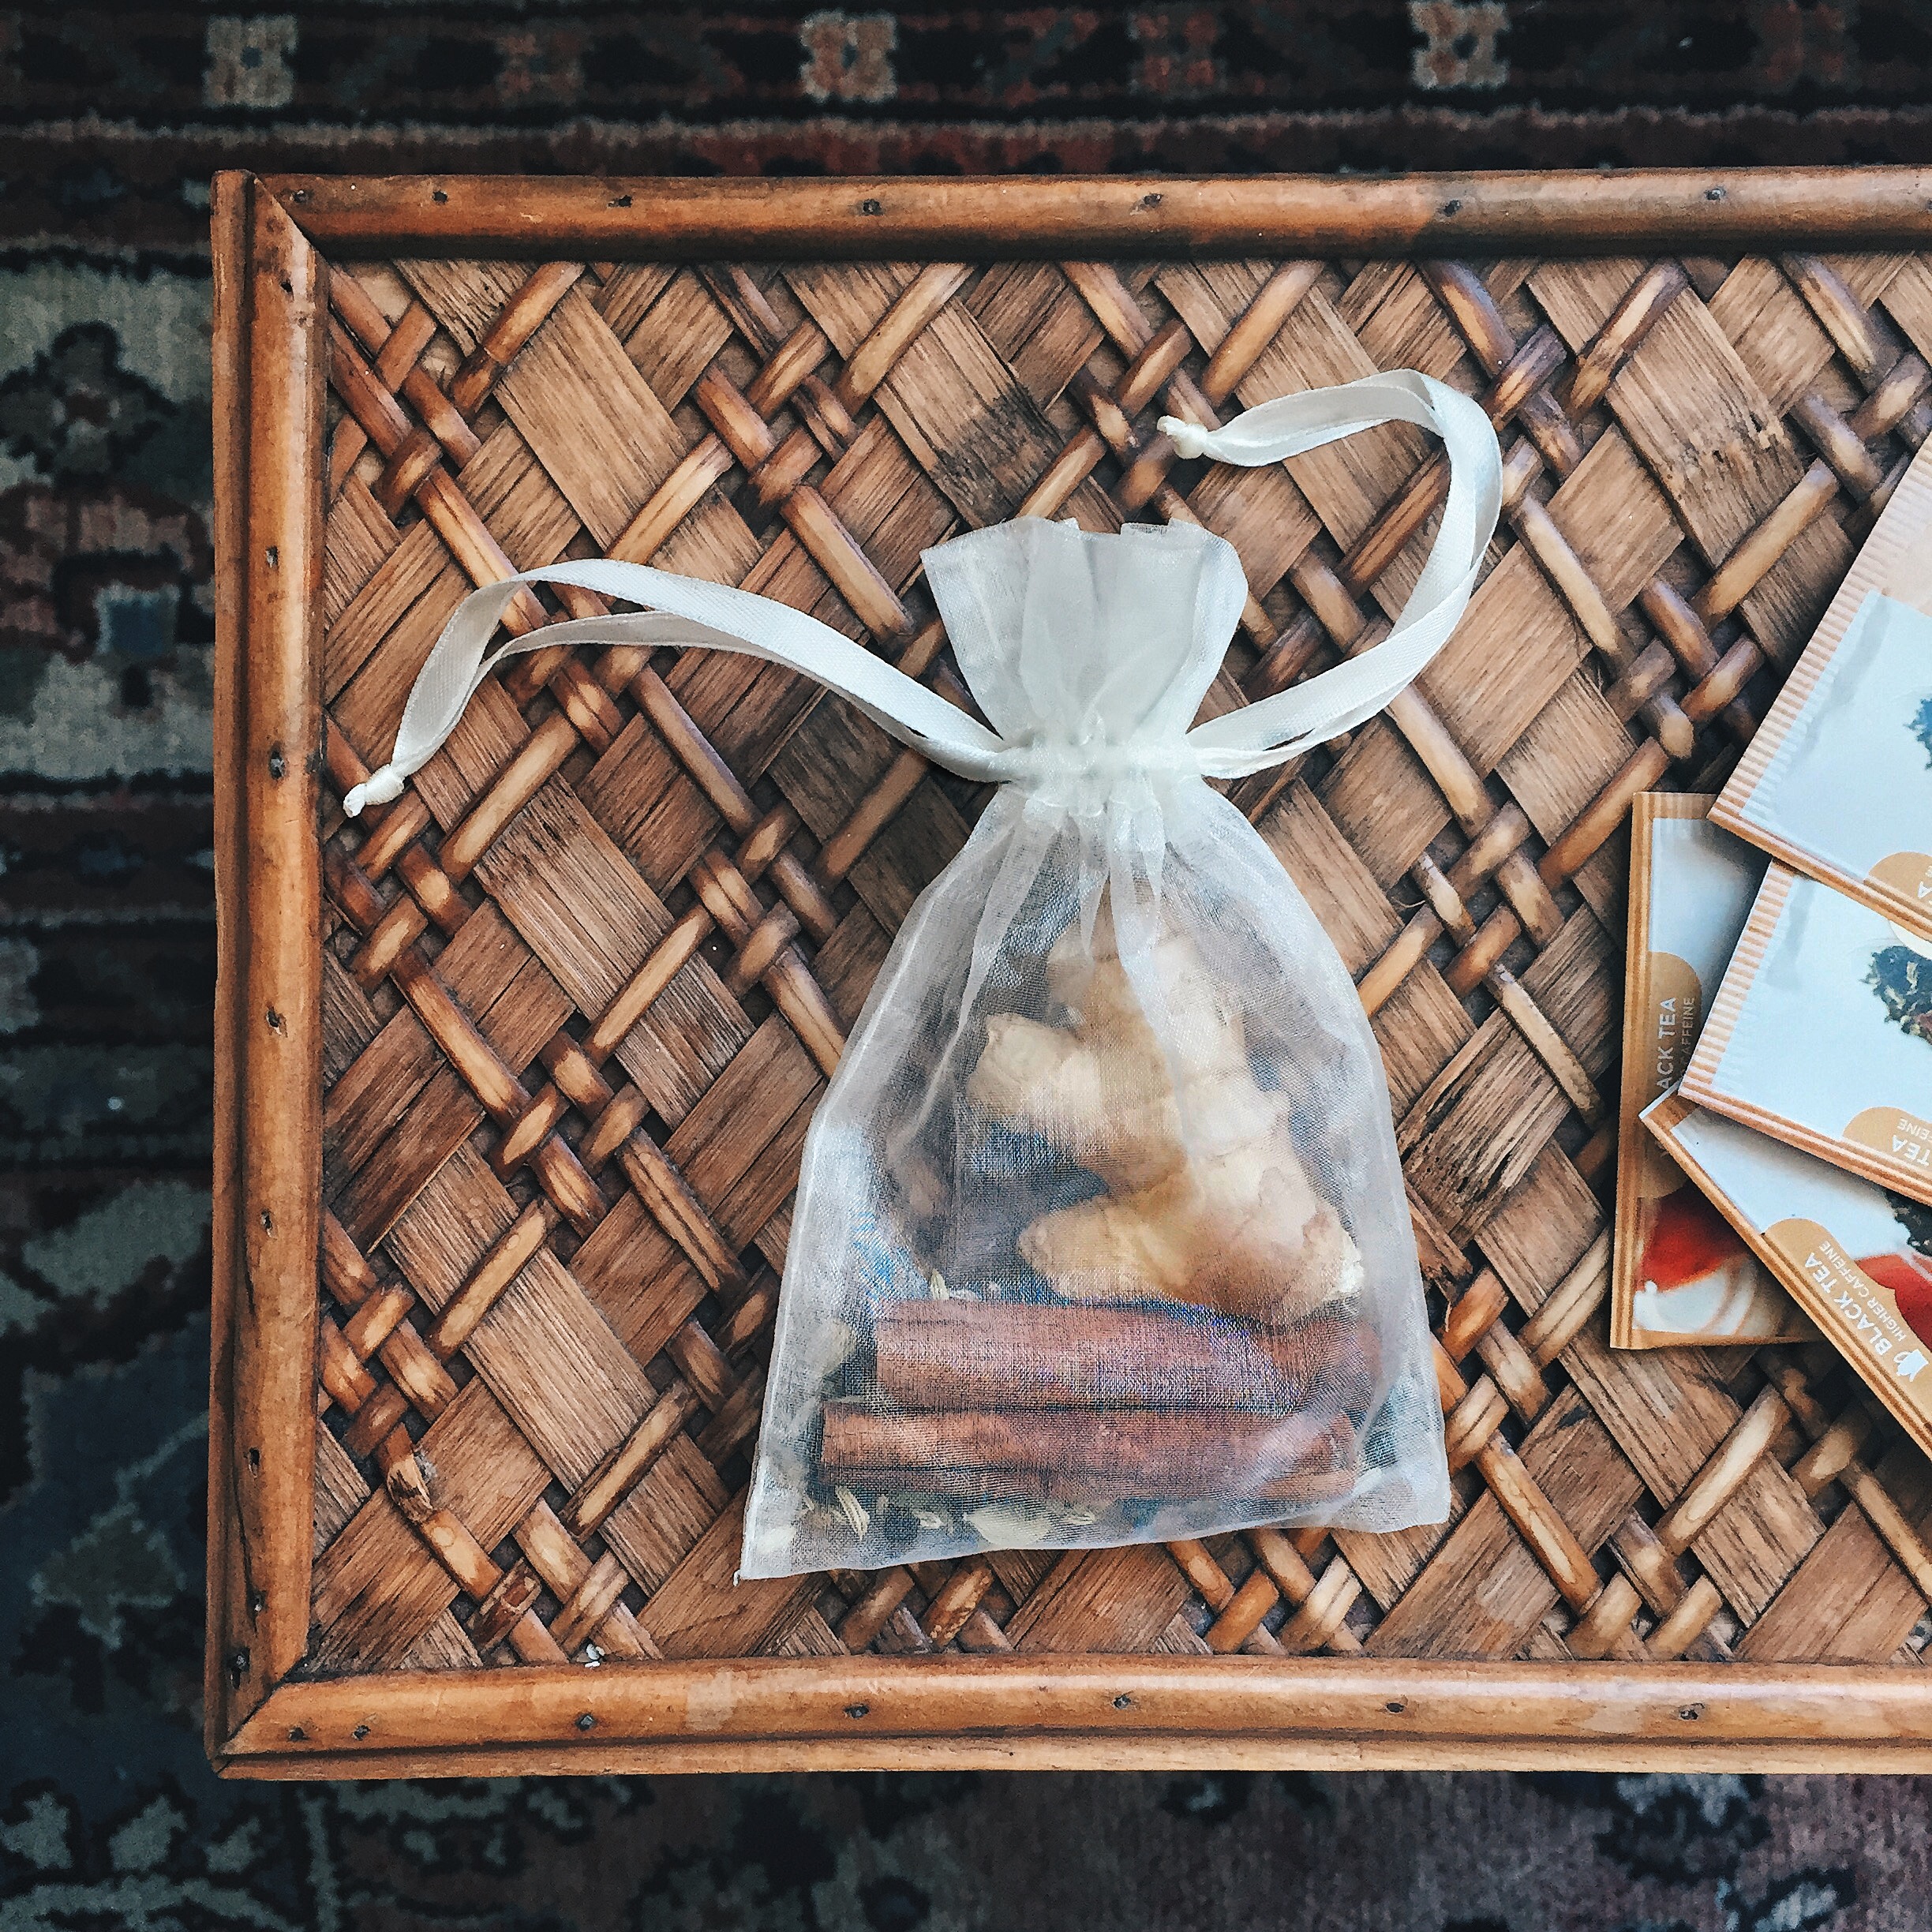 DIY Masala Chai Mix Gift Set: Create a sweet gift using items from your spice drawer